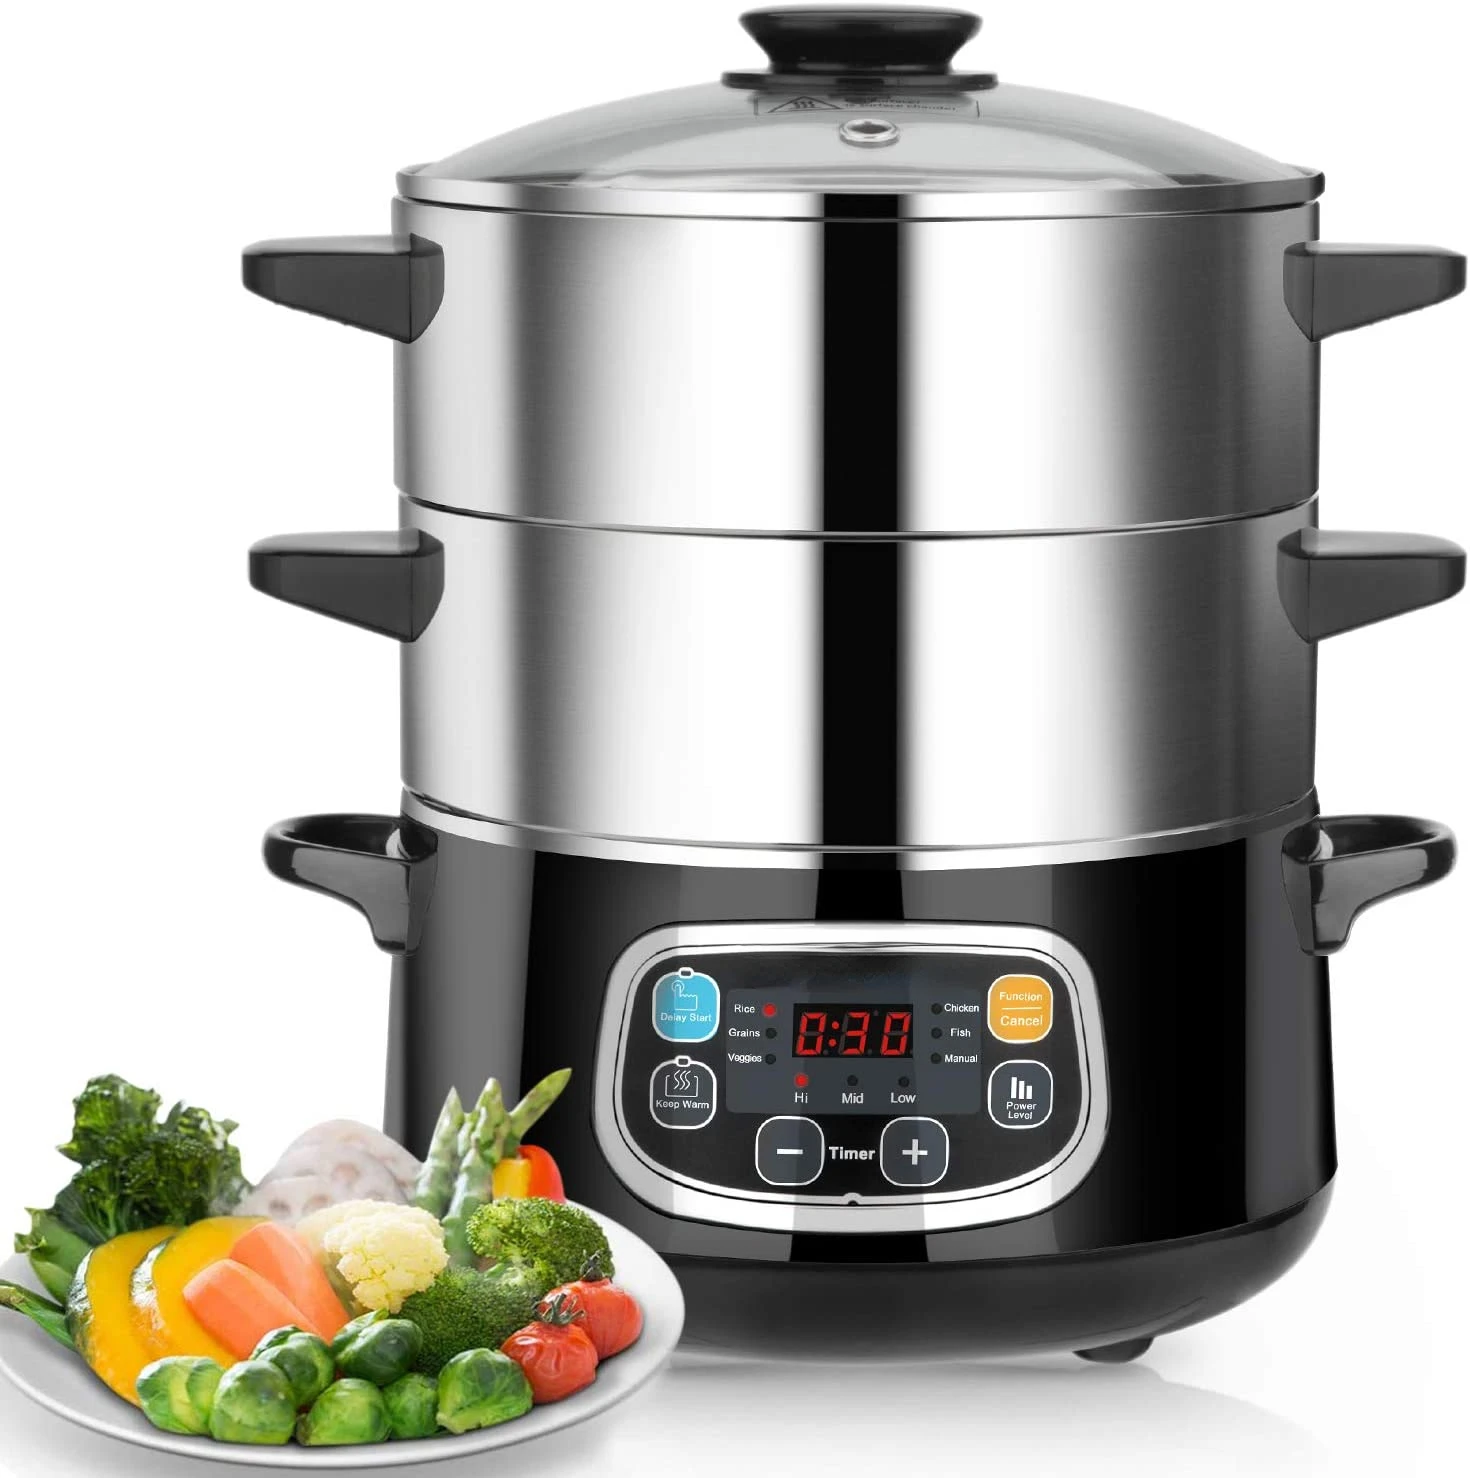 

Steamer, Vegetable Double Tiered Stackable Baskets with Timer 1200W Fast Heating Stainless Steel Digital Steamer 8.5 Quart